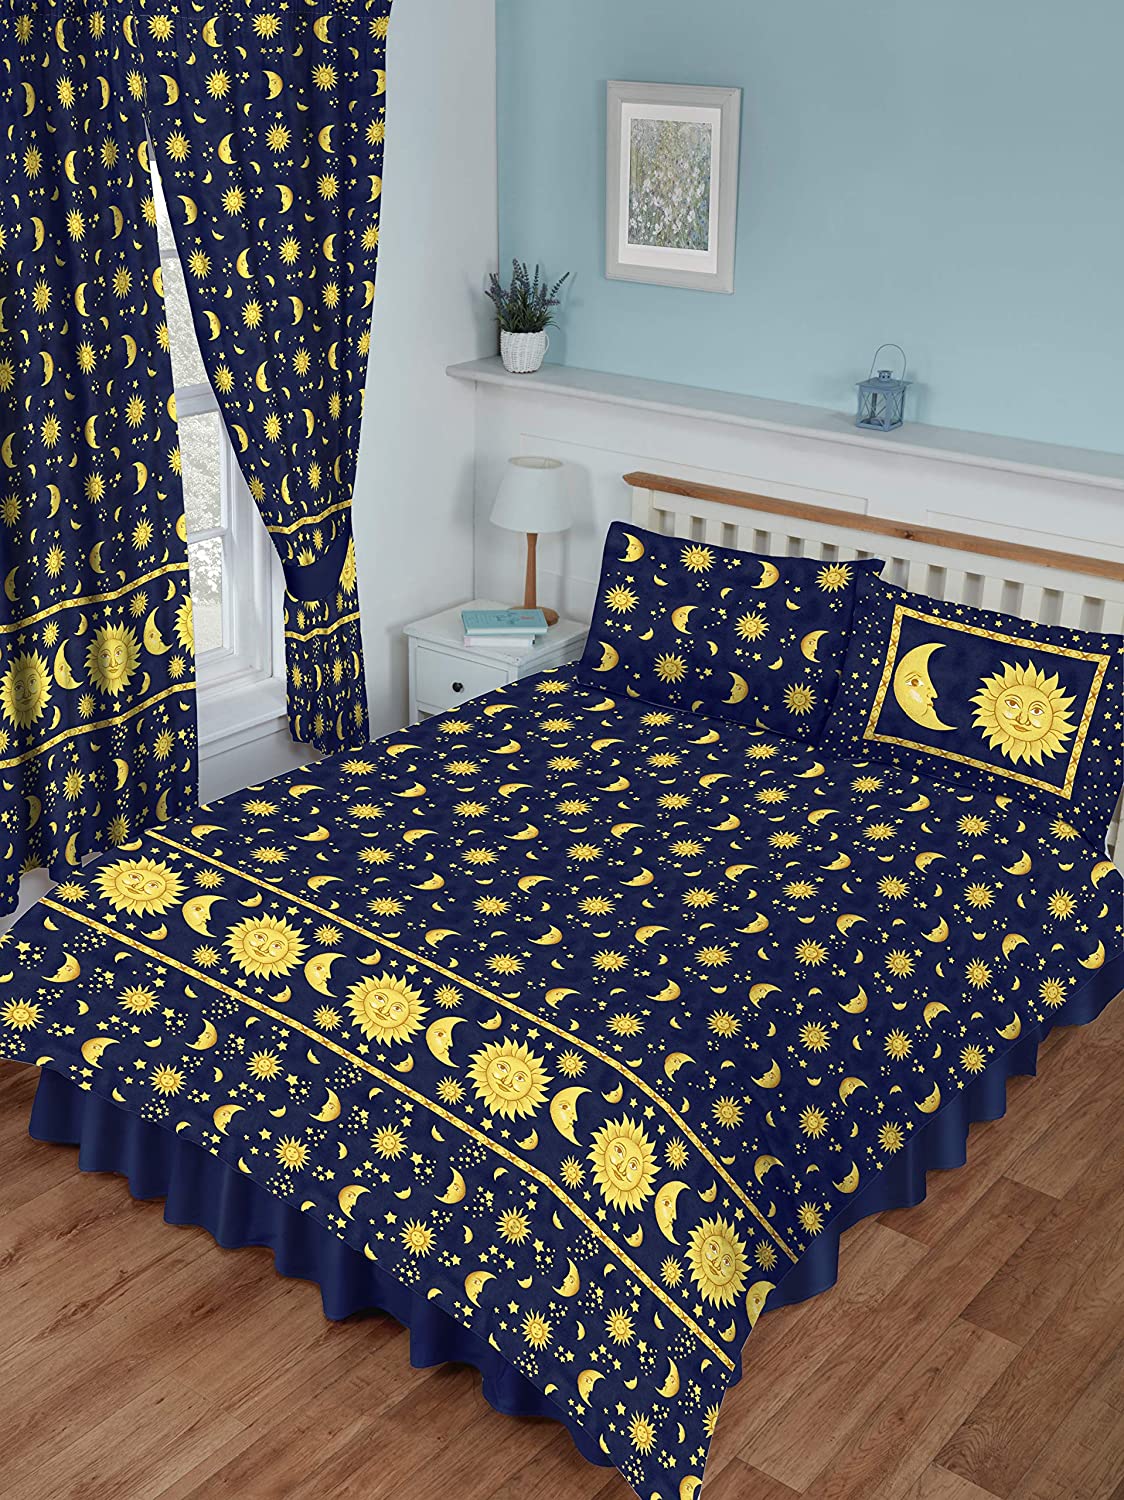 SUPER KING SIZE BED X 6 ASSORTED DESIGNS